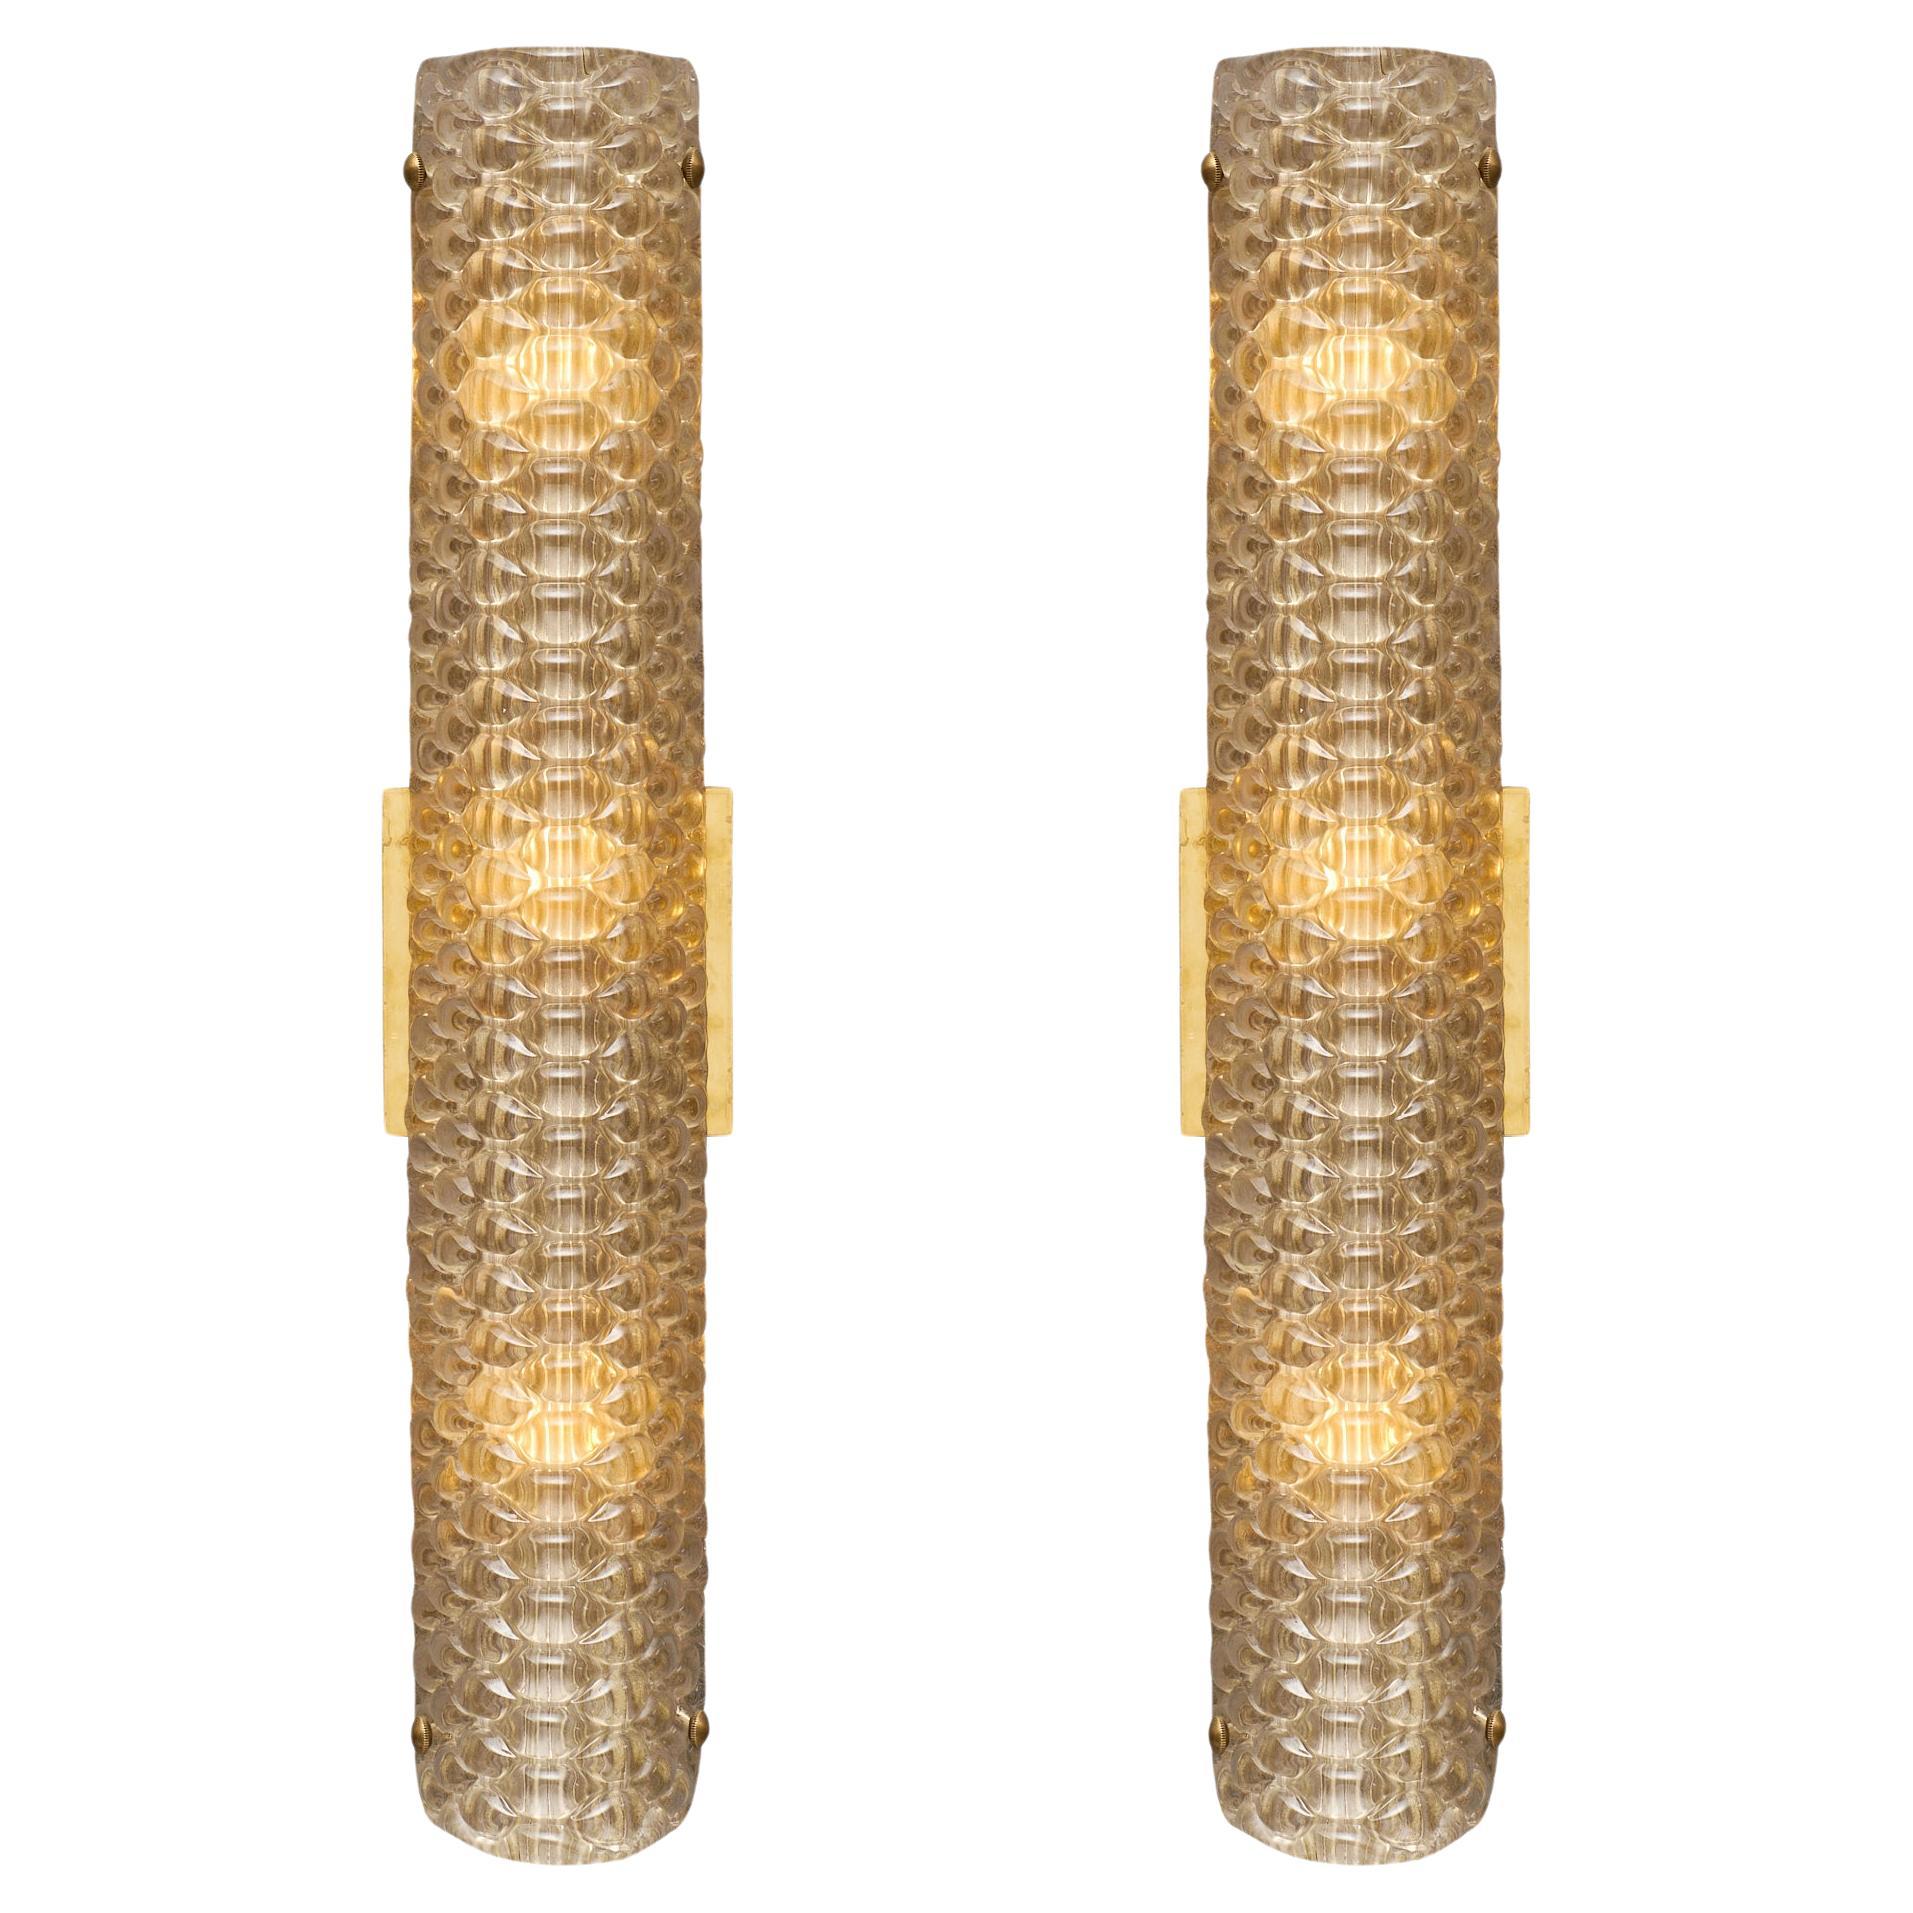 Modernist Murano Glass Textured Sconces For Sale